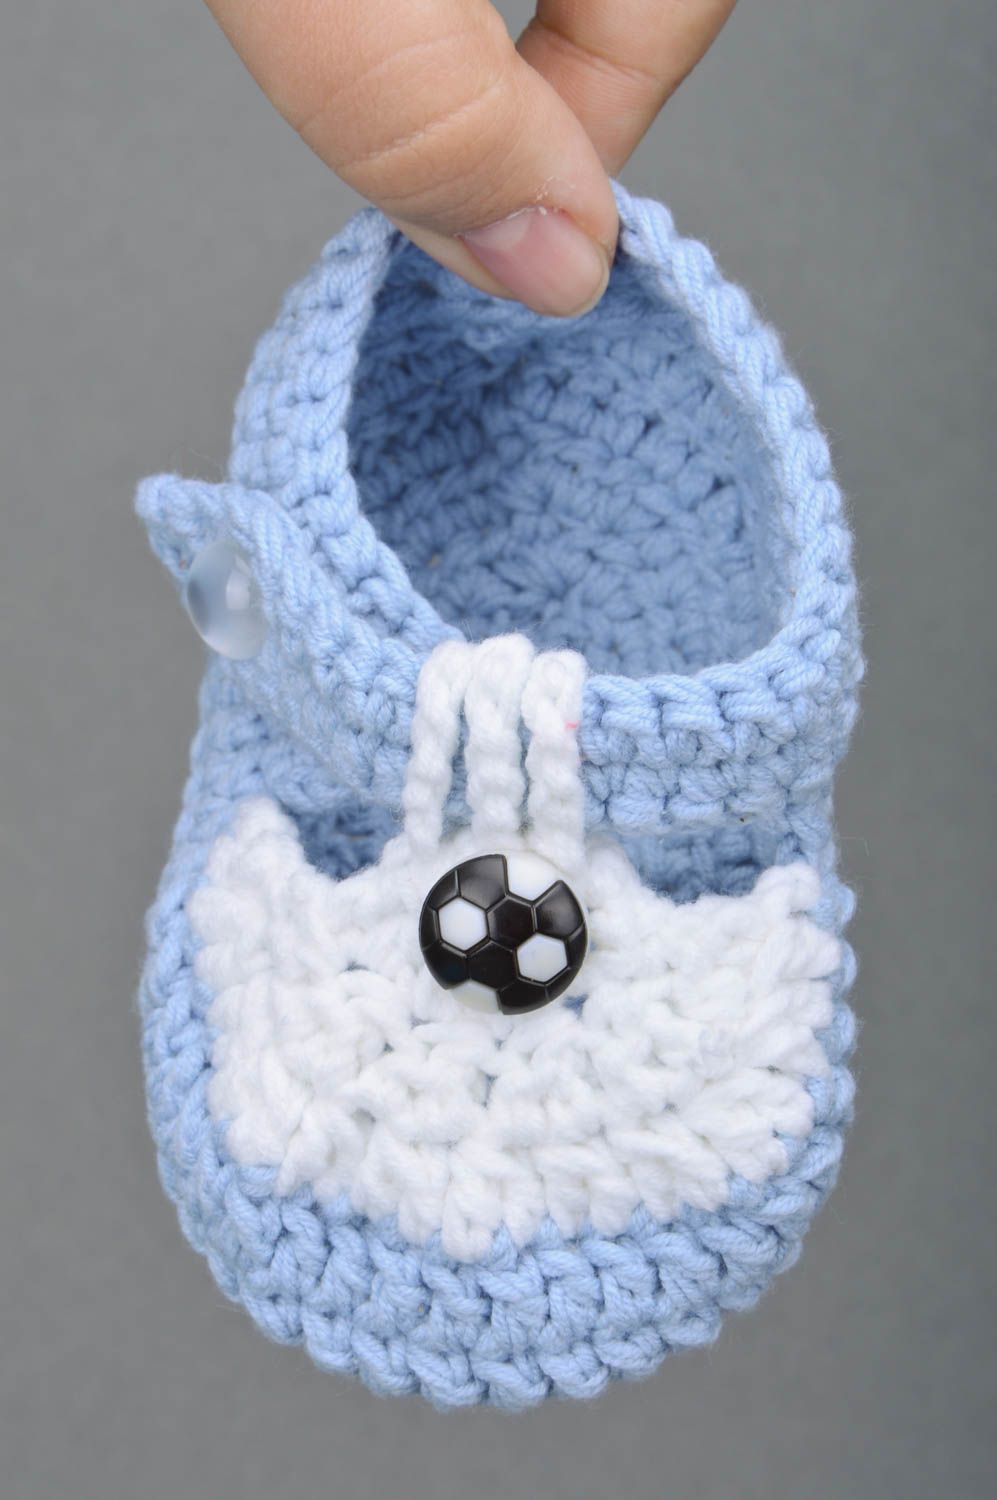 Handmade baby shoes crocheted of cotton and acrylic threads white and blue photo 4